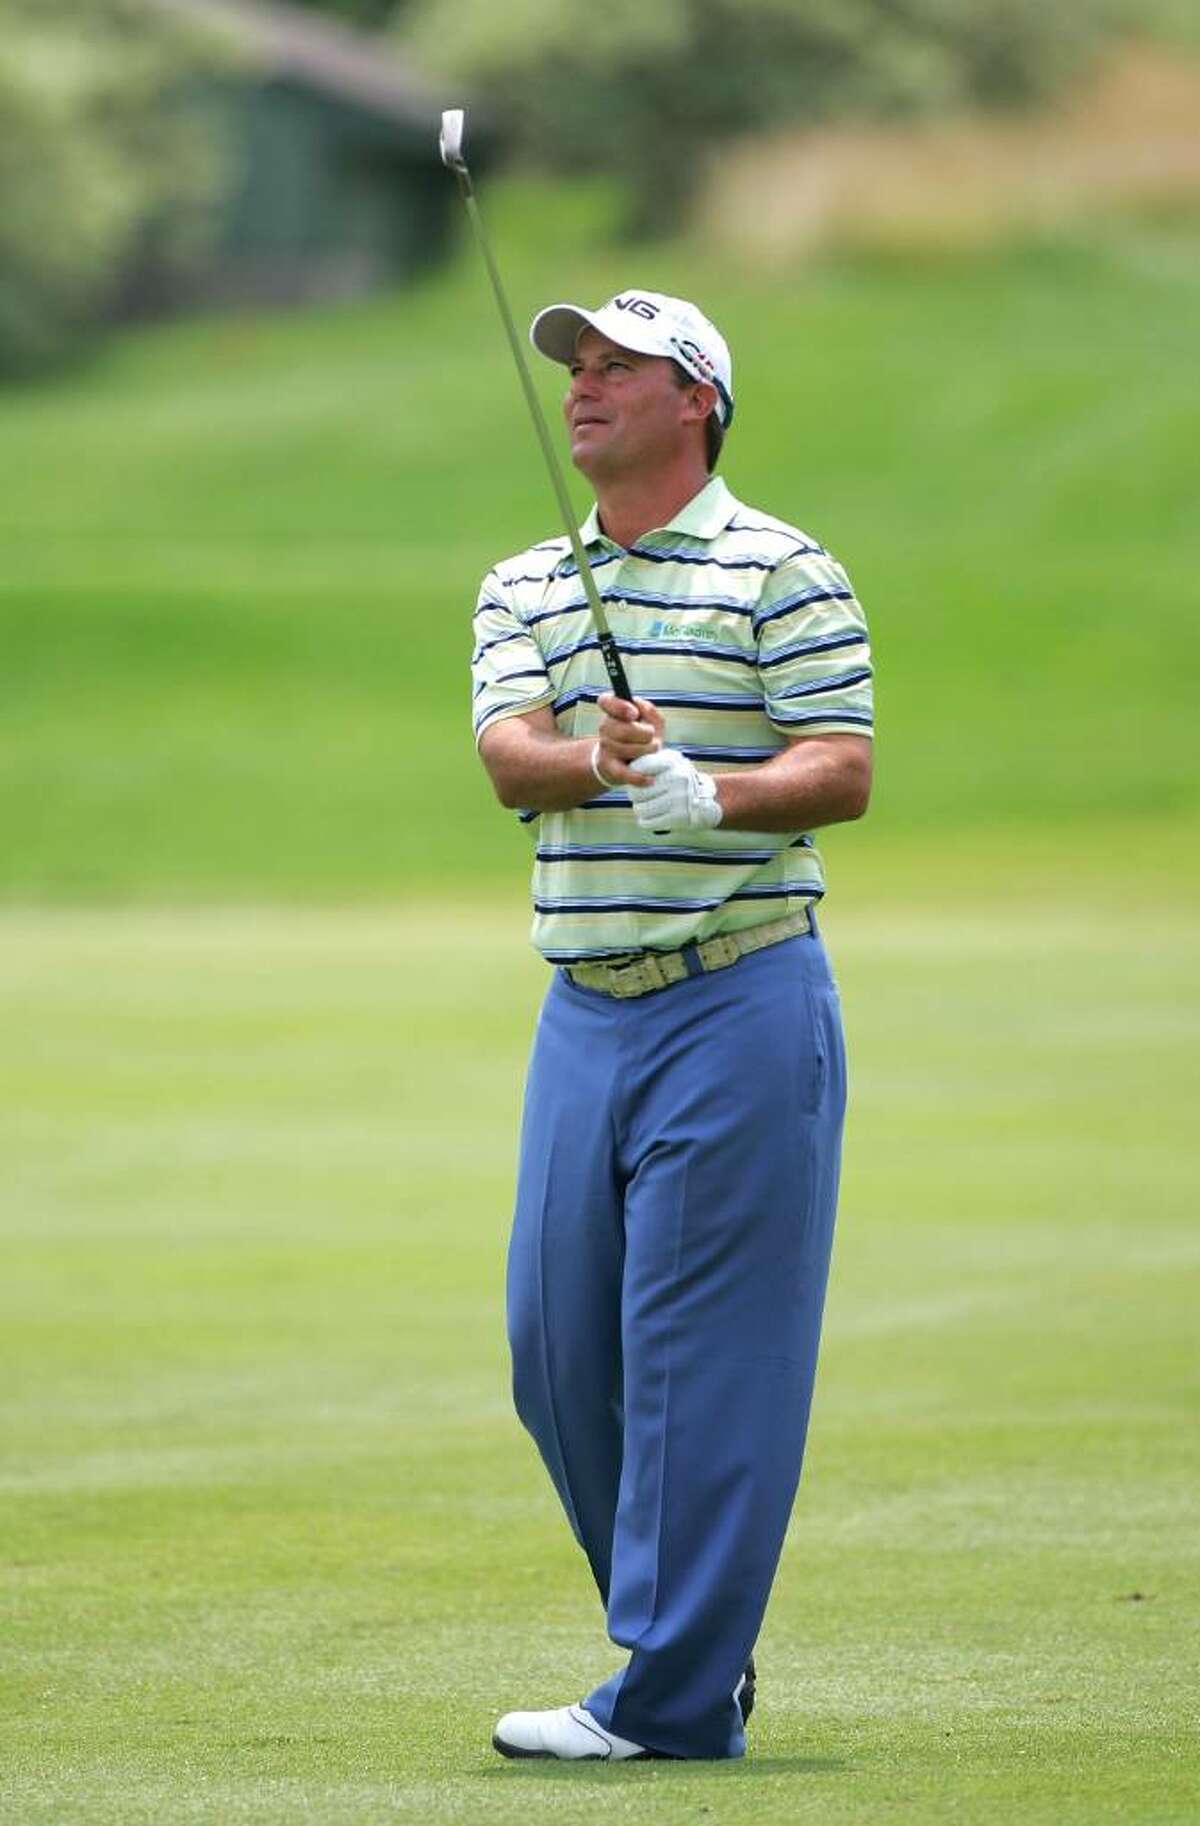 CROMWELL, CT - JUNE 26: Chris DiMarco watches his second shot on the 17th hole during the third round of the Travelers Championship held at TPC River Highlands on June 26, 2010 in Cromwell, Connecticut. (Photo by Michael Cohen/Getty Images) *** Local Caption *** Chris DiMarco